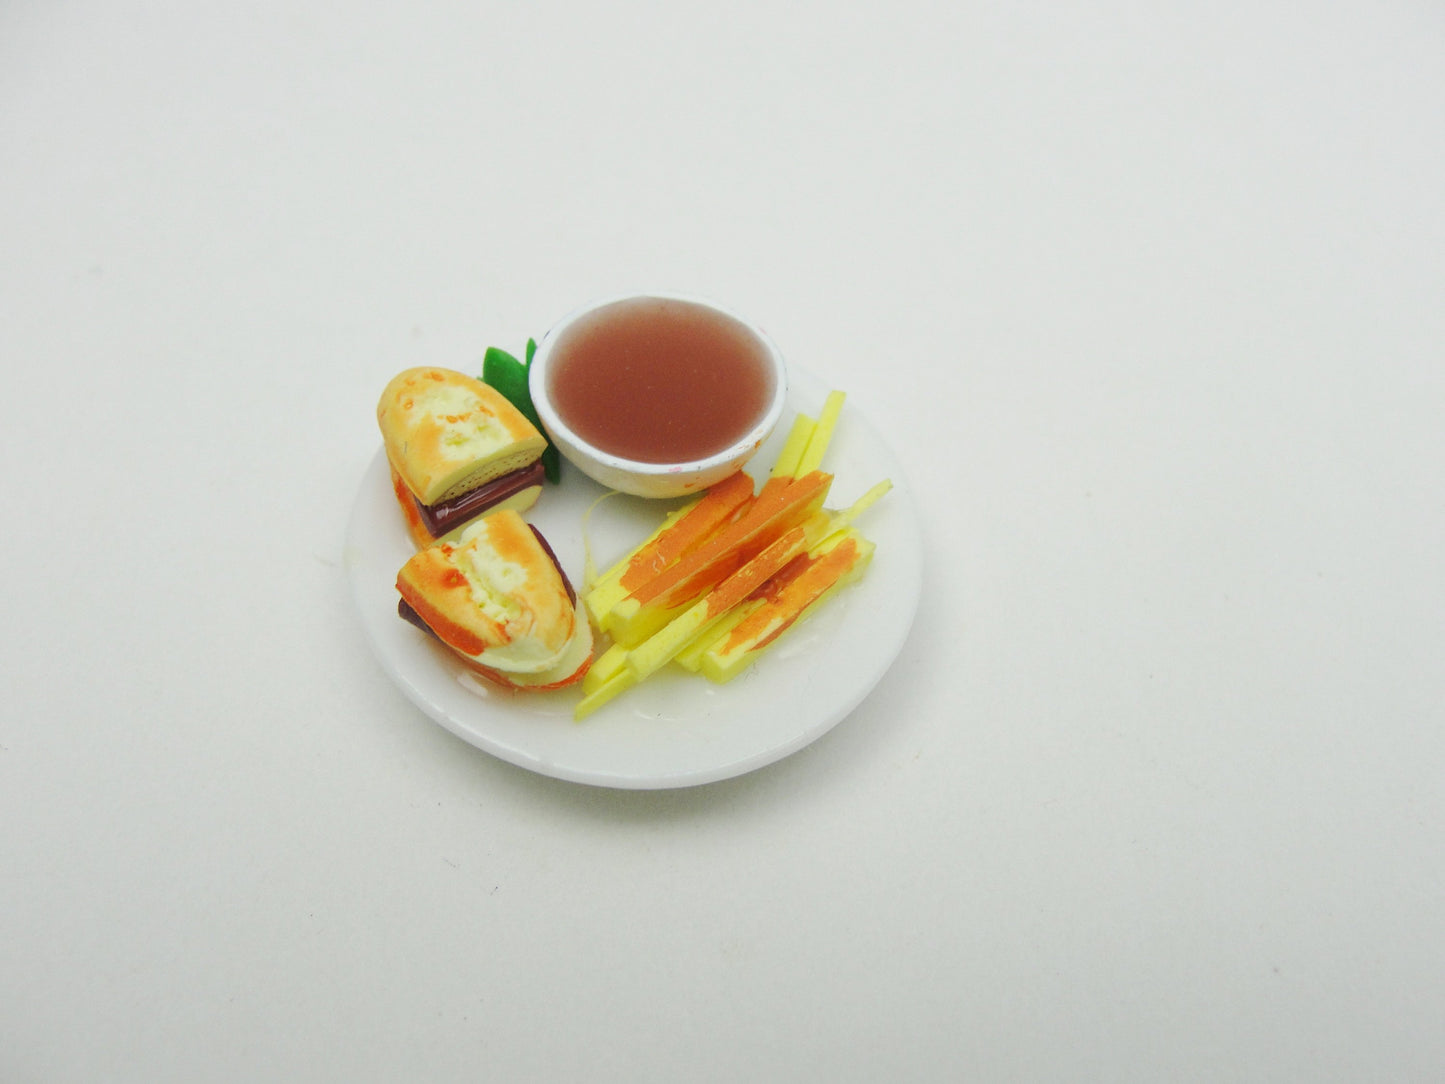 Dollhouse miniature plate of food - Miniatures - Craft Supply House